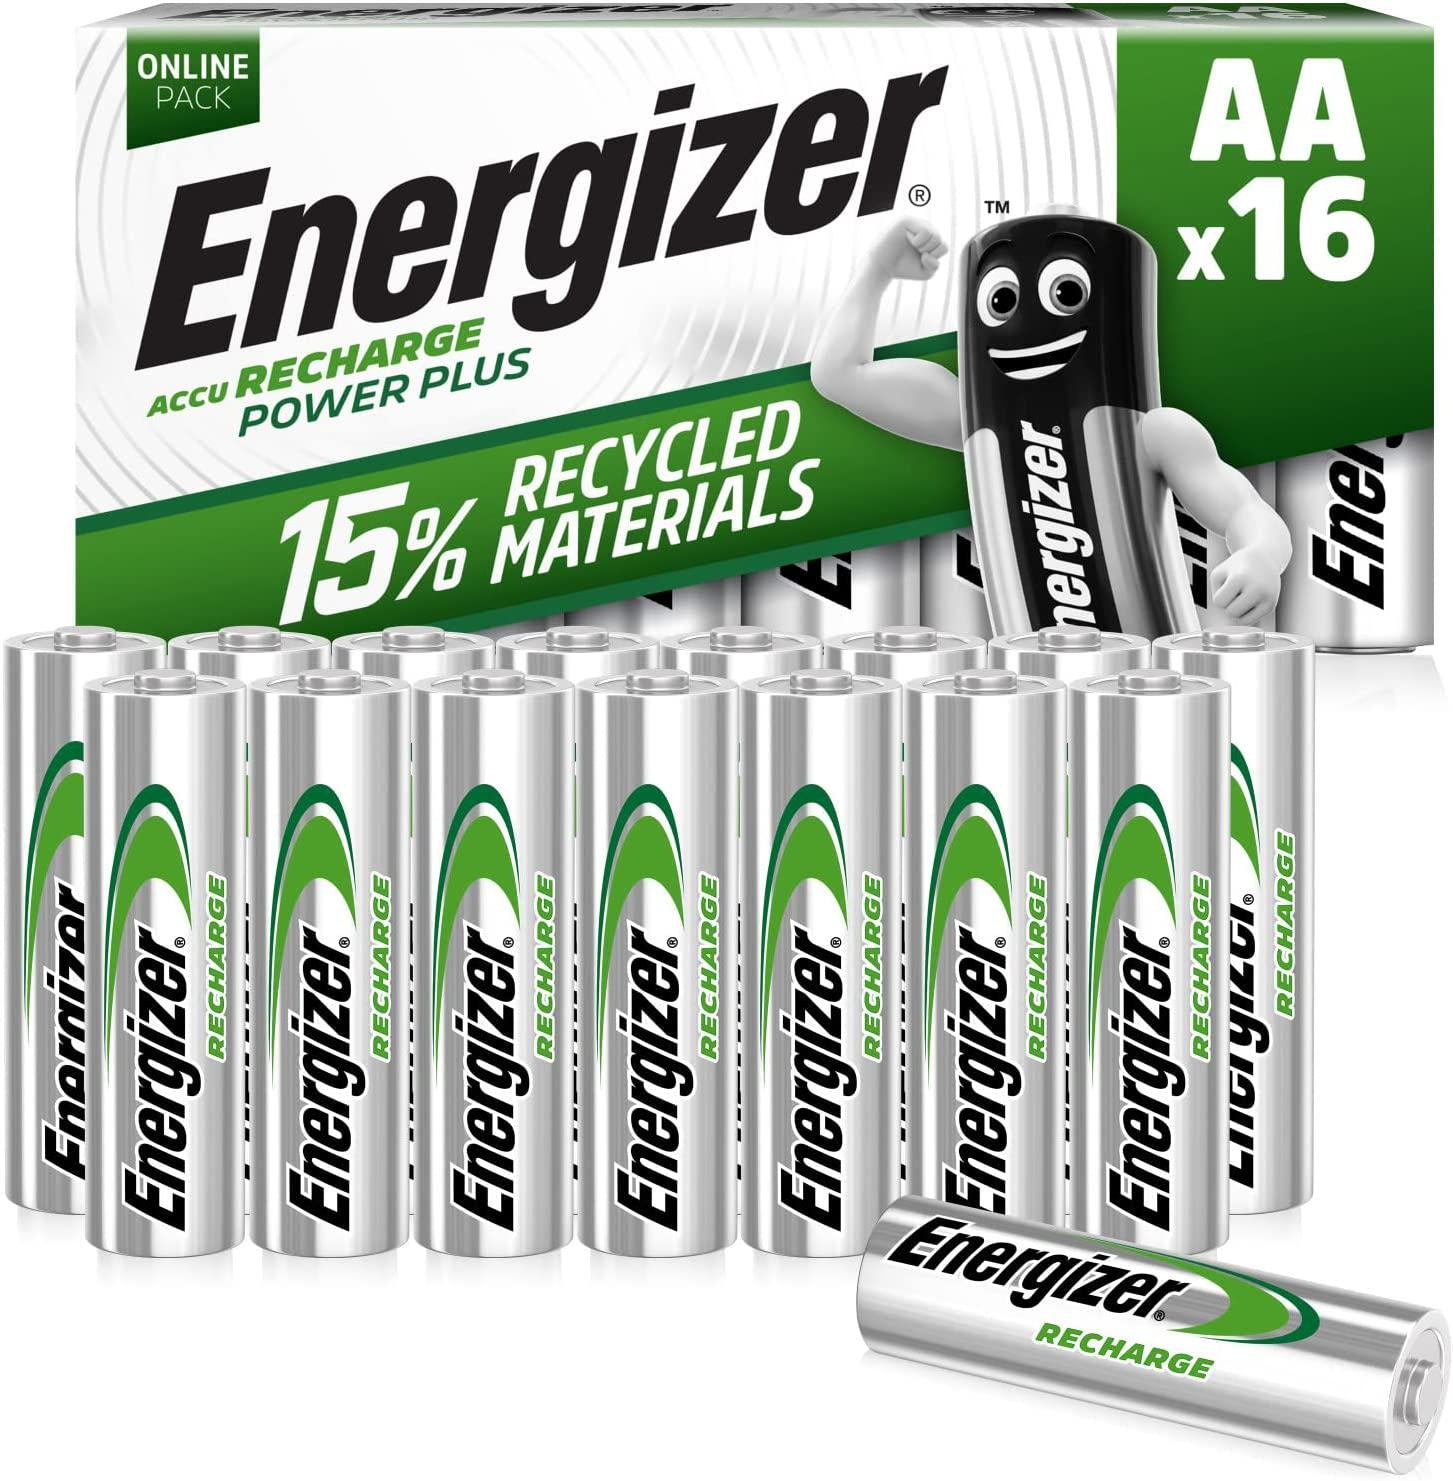 Energizer, Energizer Rechargeable Batteries AA, Recharge Power Plus, Pack of 16